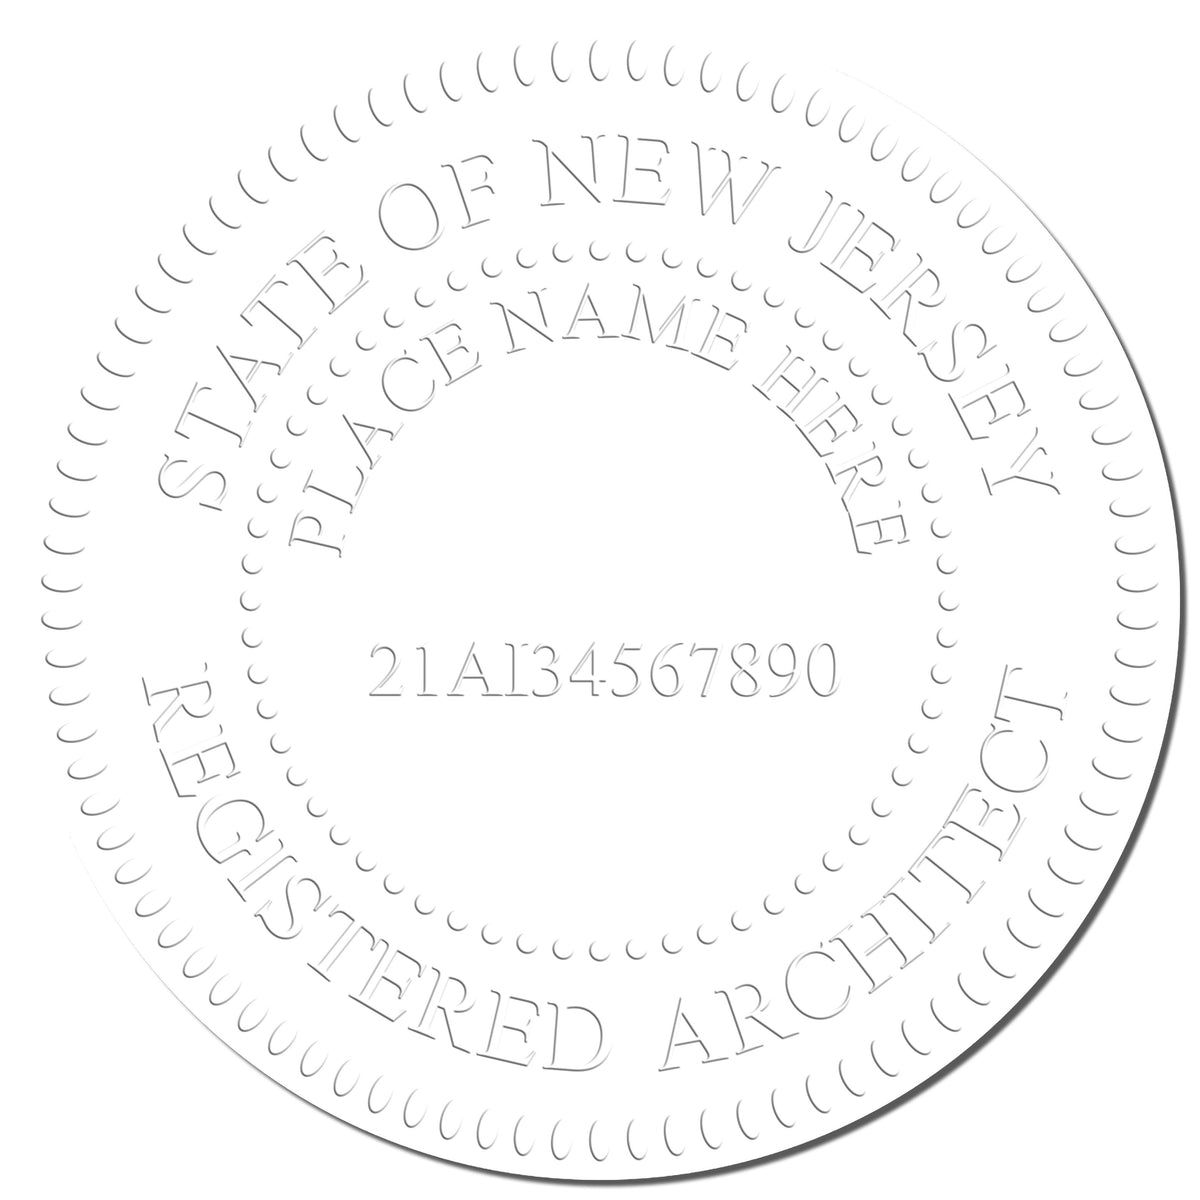 This paper is stamped with a sample imprint of the Gift New Jersey Architect Seal, signifying its quality and reliability.